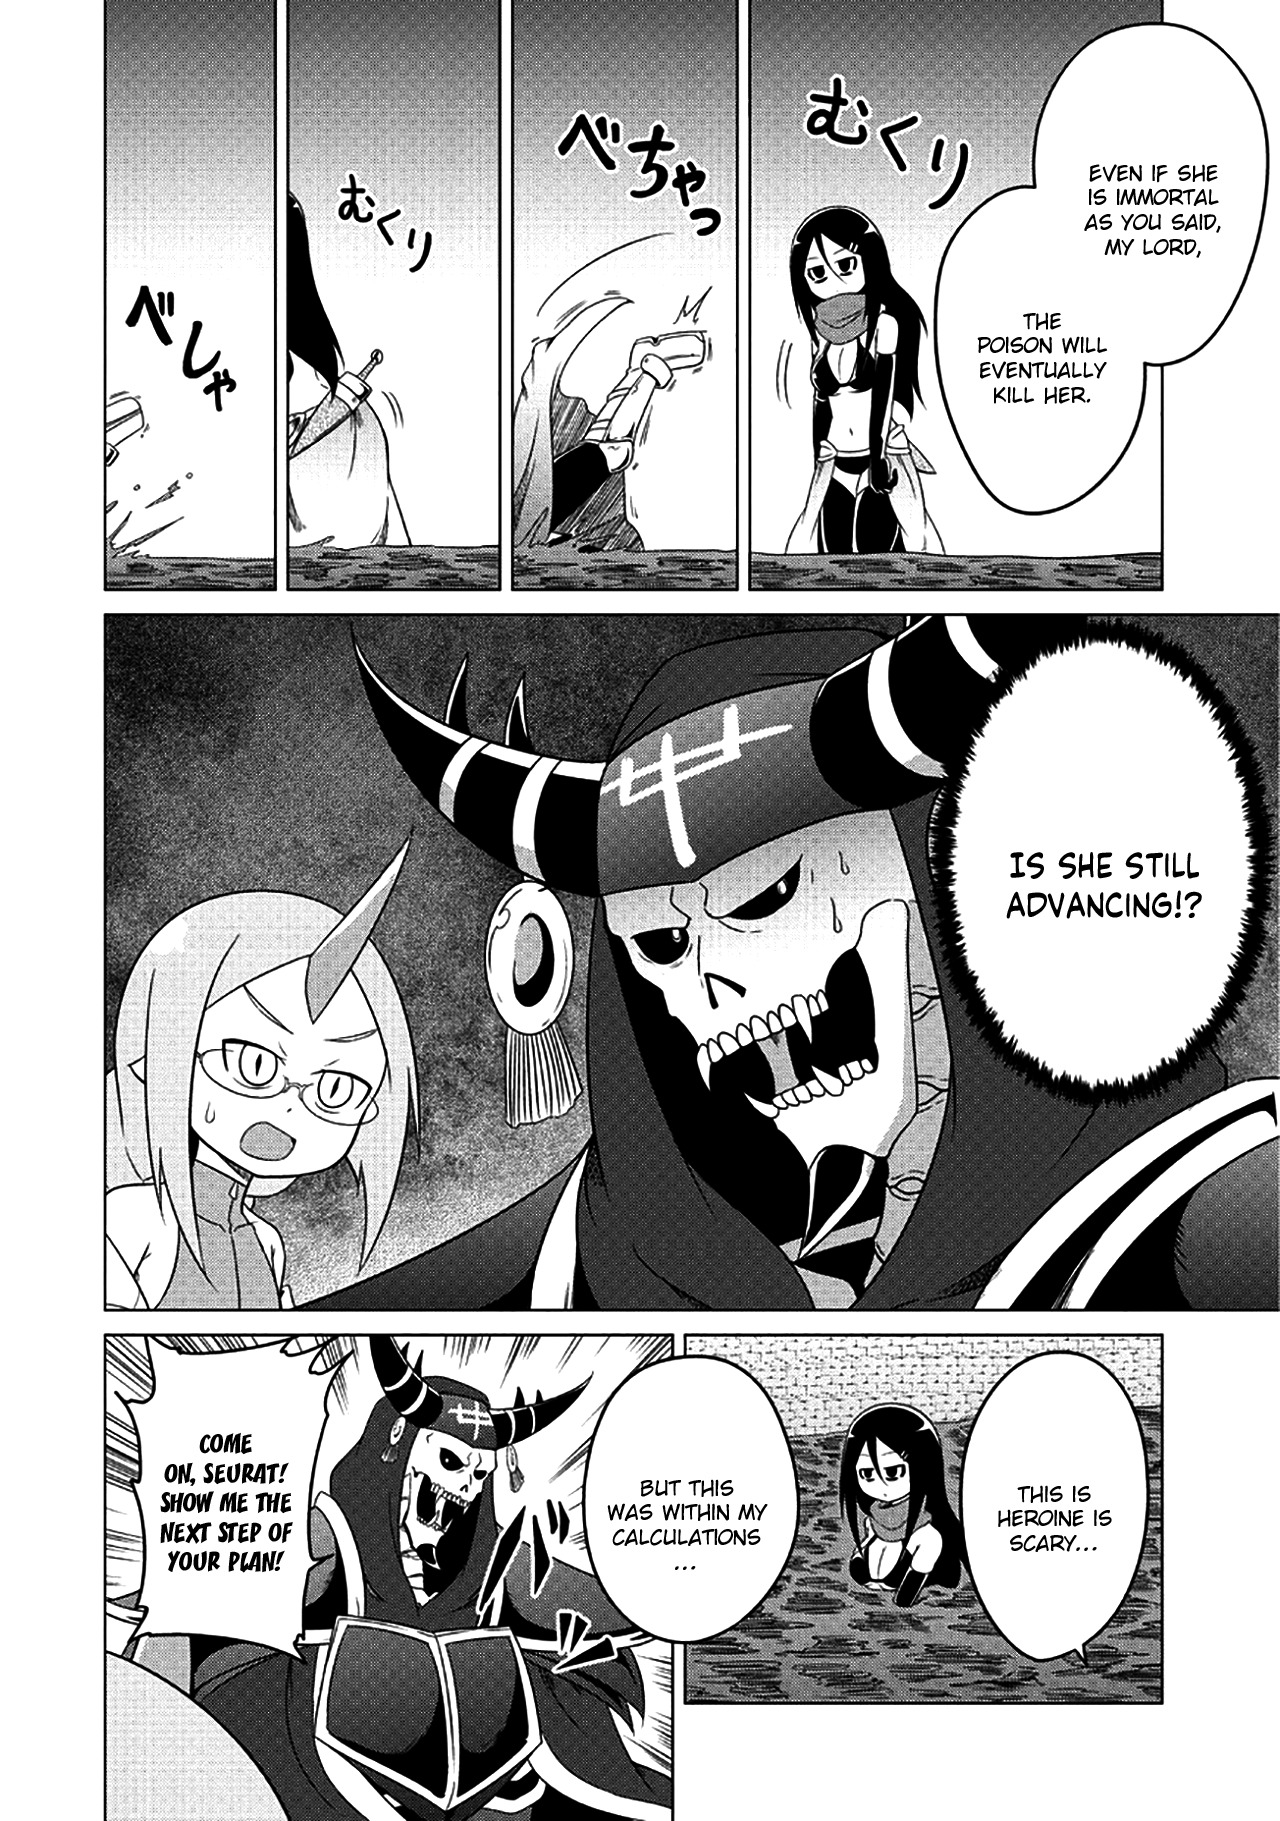 The Devil is Troubled by the Suicidal Heroine vol.1 ch.2